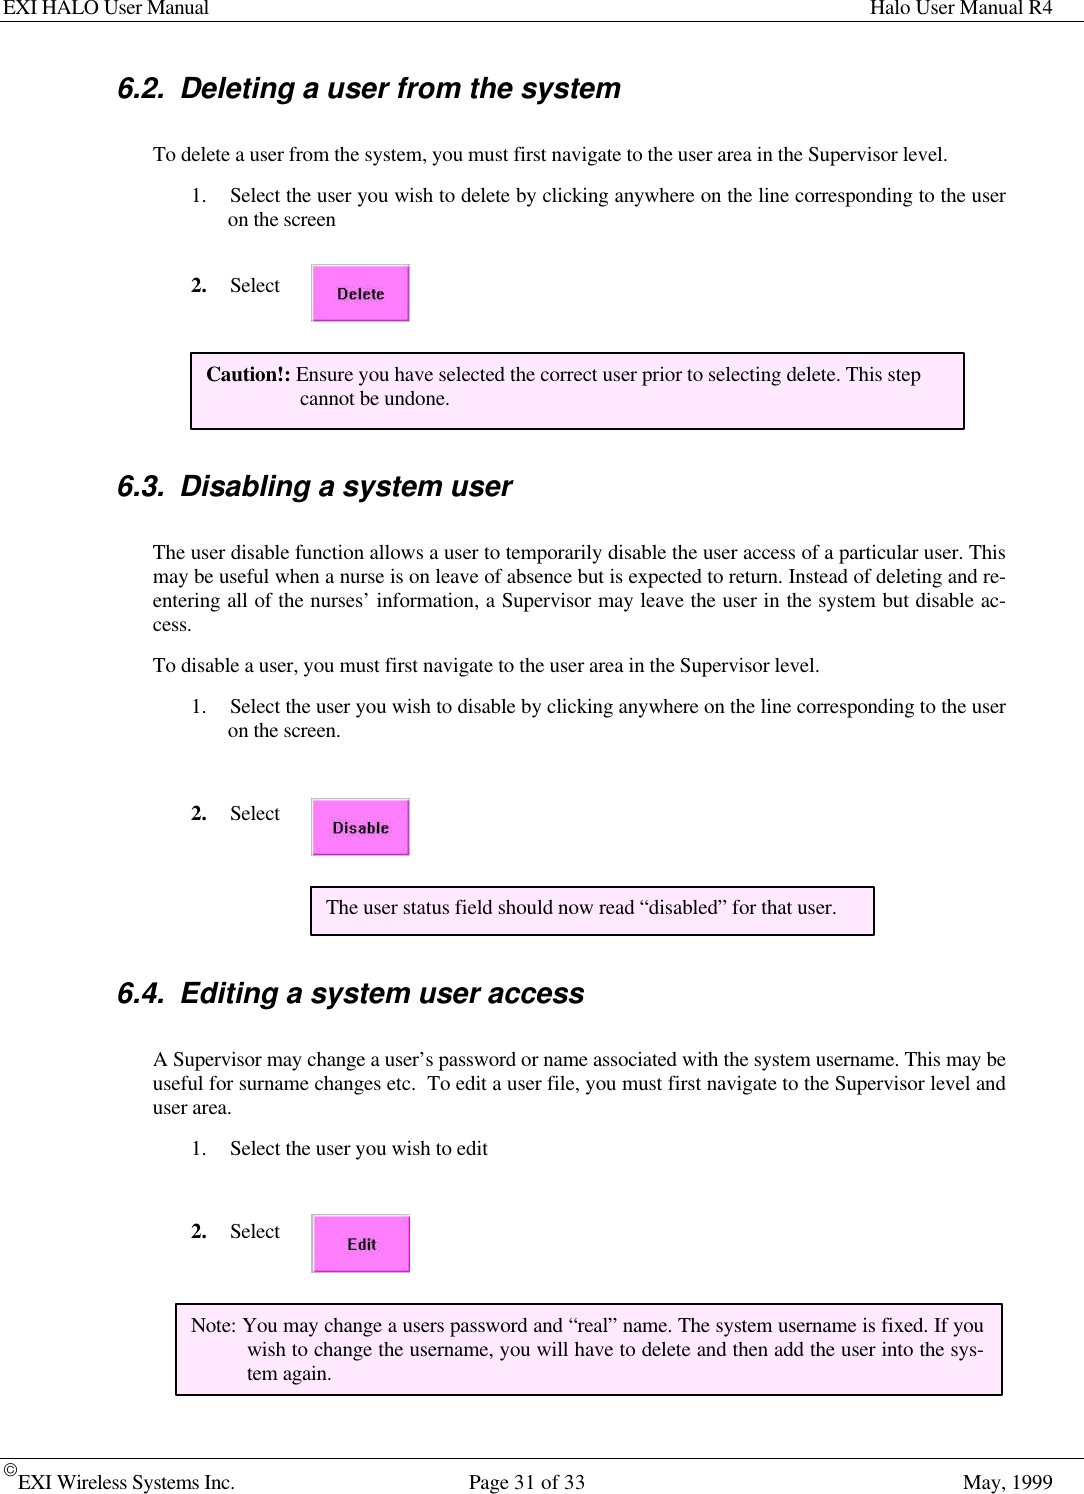 EXI HALO User Manual Halo User Manual R4EXI Wireless Systems Inc. Page 31 of 33 May, 19996.2. Deleting a user from the systemTo delete a user from the system, you must first navigate to the user area in the Supervisor level.1. Select the user you wish to delete by clicking anywhere on the line corresponding to the useron the screen2. Select6.3. Disabling a system userThe user disable function allows a user to temporarily disable the user access of a particular user. Thismay be useful when a nurse is on leave of absence but is expected to return. Instead of deleting and re-entering all of the nurses’ information, a Supervisor may leave the user in the system but disable ac-cess.To disable a user, you must first navigate to the user area in the Supervisor level.1. Select the user you wish to disable by clicking anywhere on the line corresponding to the useron the screen.2. Select6.4. Editing a system user accessA Supervisor may change a user’s password or name associated with the system username. This may beuseful for surname changes etc.  To edit a user file, you must first navigate to the Supervisor level anduser area.1. Select the user you wish to edit2. SelectCaution!: Ensure you have selected the correct user prior to selecting delete. This stepcannot be undone.The user status field should now read “disabled” for that user.Note: You may change a users password and “real” name. The system username is fixed. If youwish to change the username, you will have to delete and then add the user into the sys-tem again.